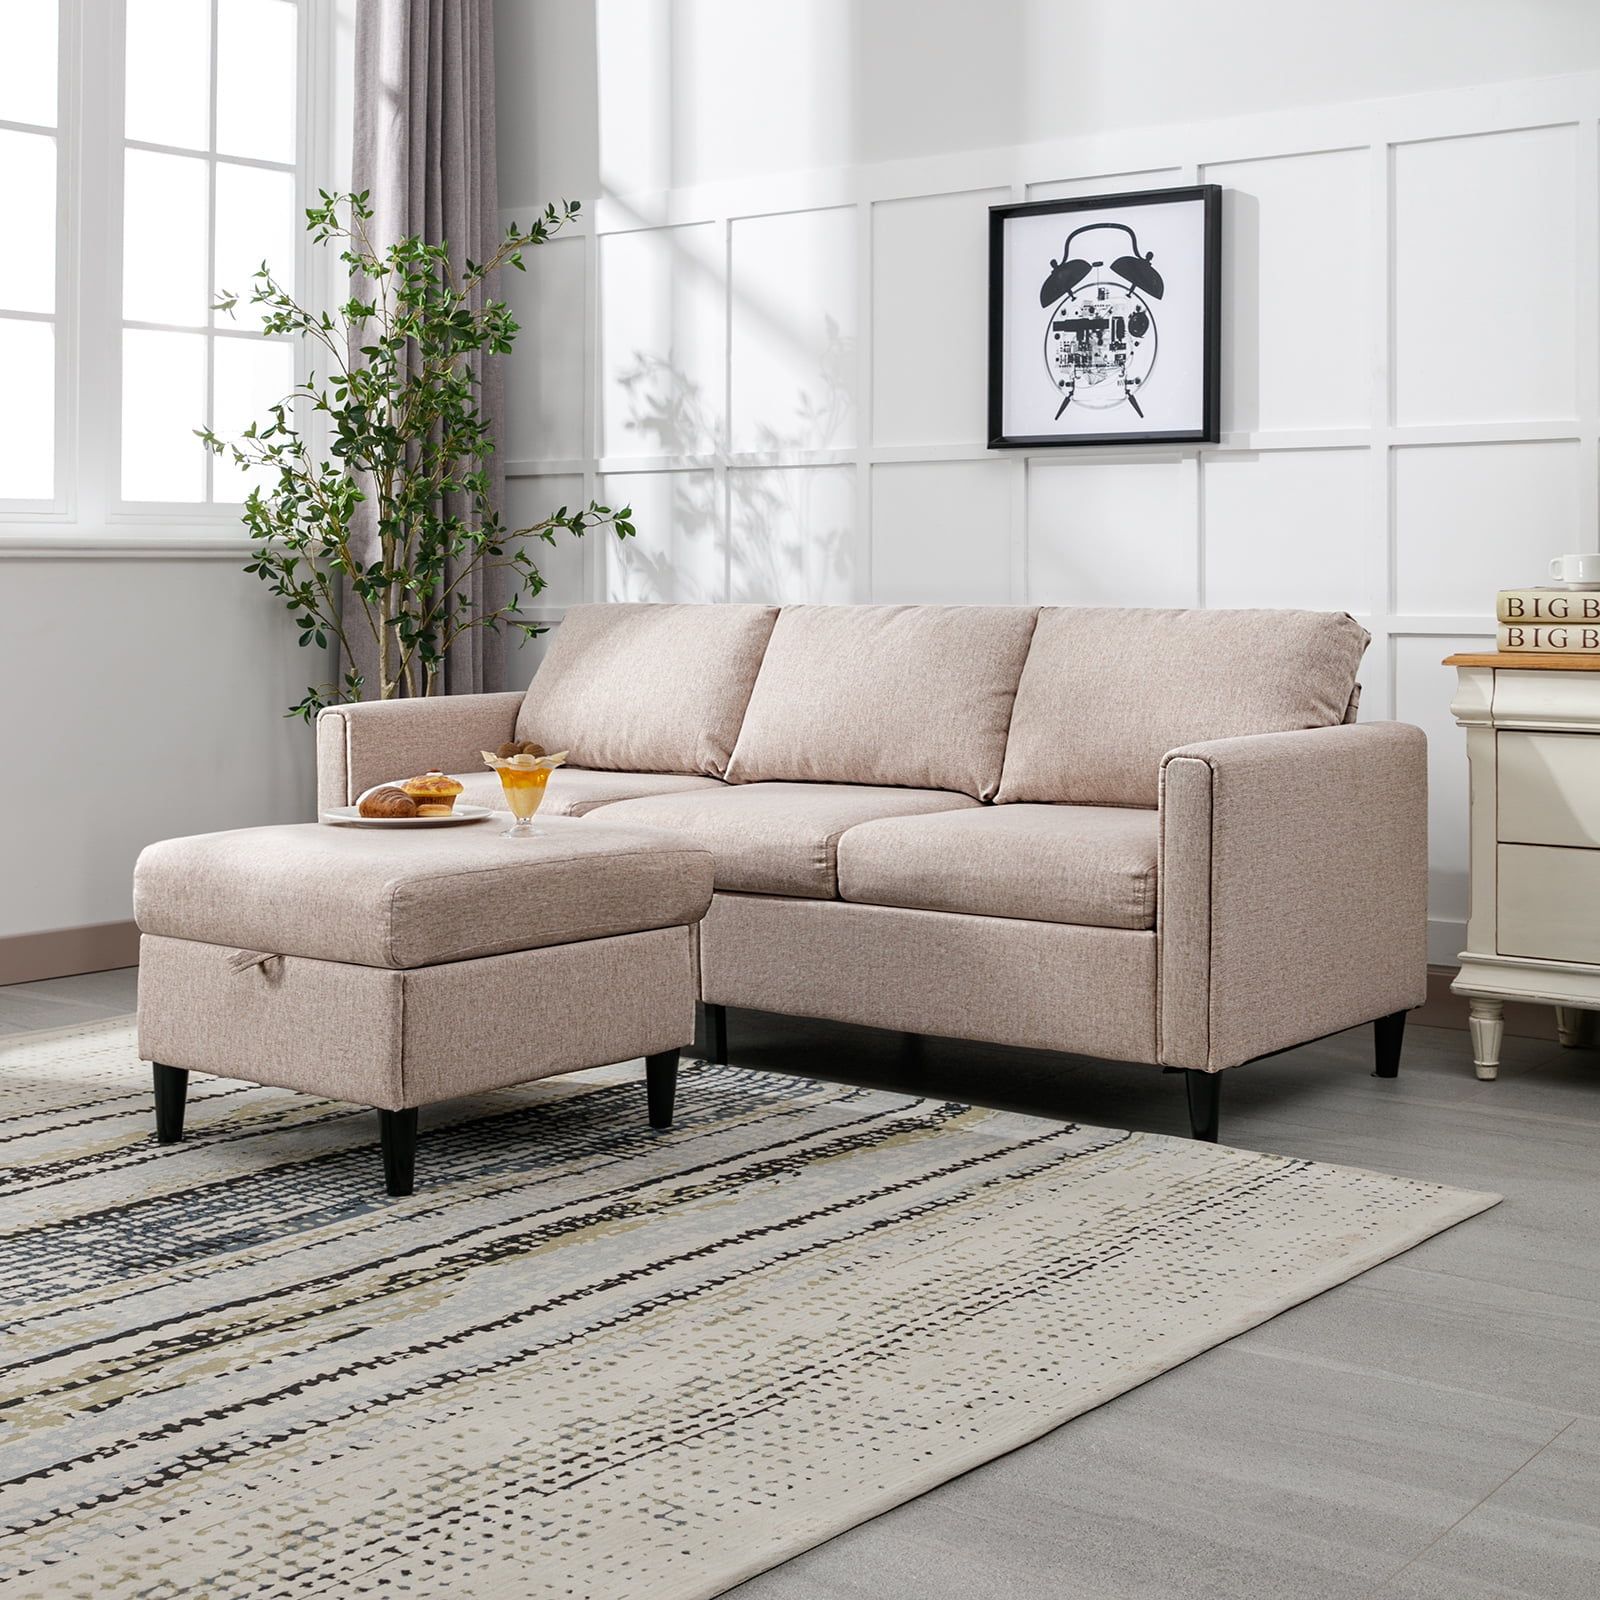 Zafly Convertible Sectional Sofa Couch, 3 Seat Upholstered Sofa With  Flexible Storage Ottoman Chaise, Modern Modular L Shape Couches For Living  Room/Office – Beige – Walmart With Regard To Beige L Shaped Sectional Sofas (View 9 of 15)